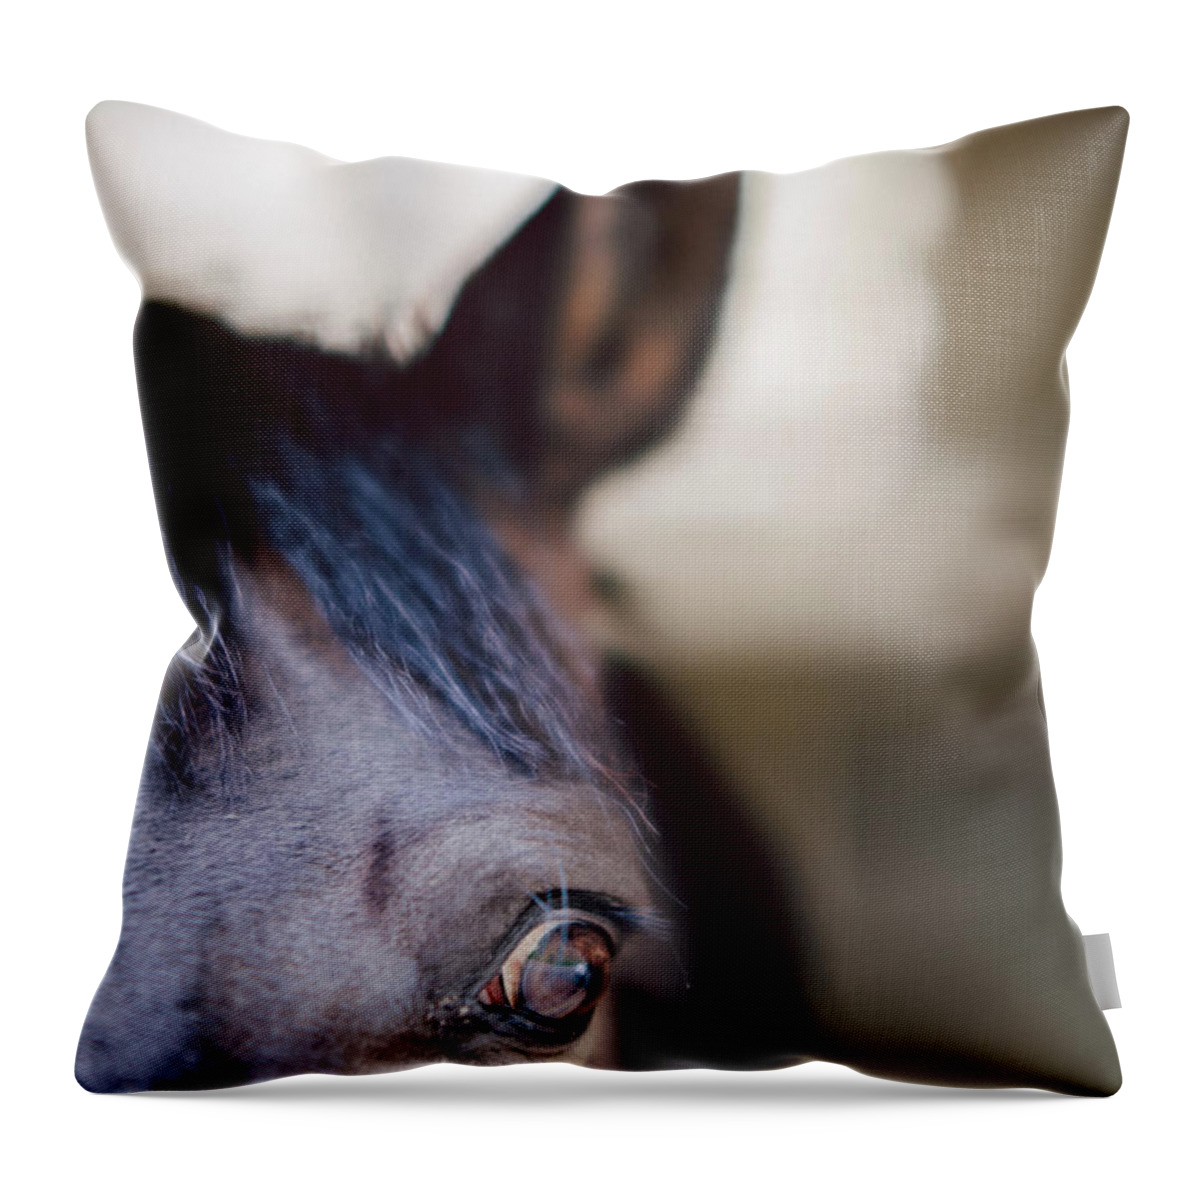 Horse Throw Pillow featuring the photograph Horse Eye , Close Up by Guido Mieth